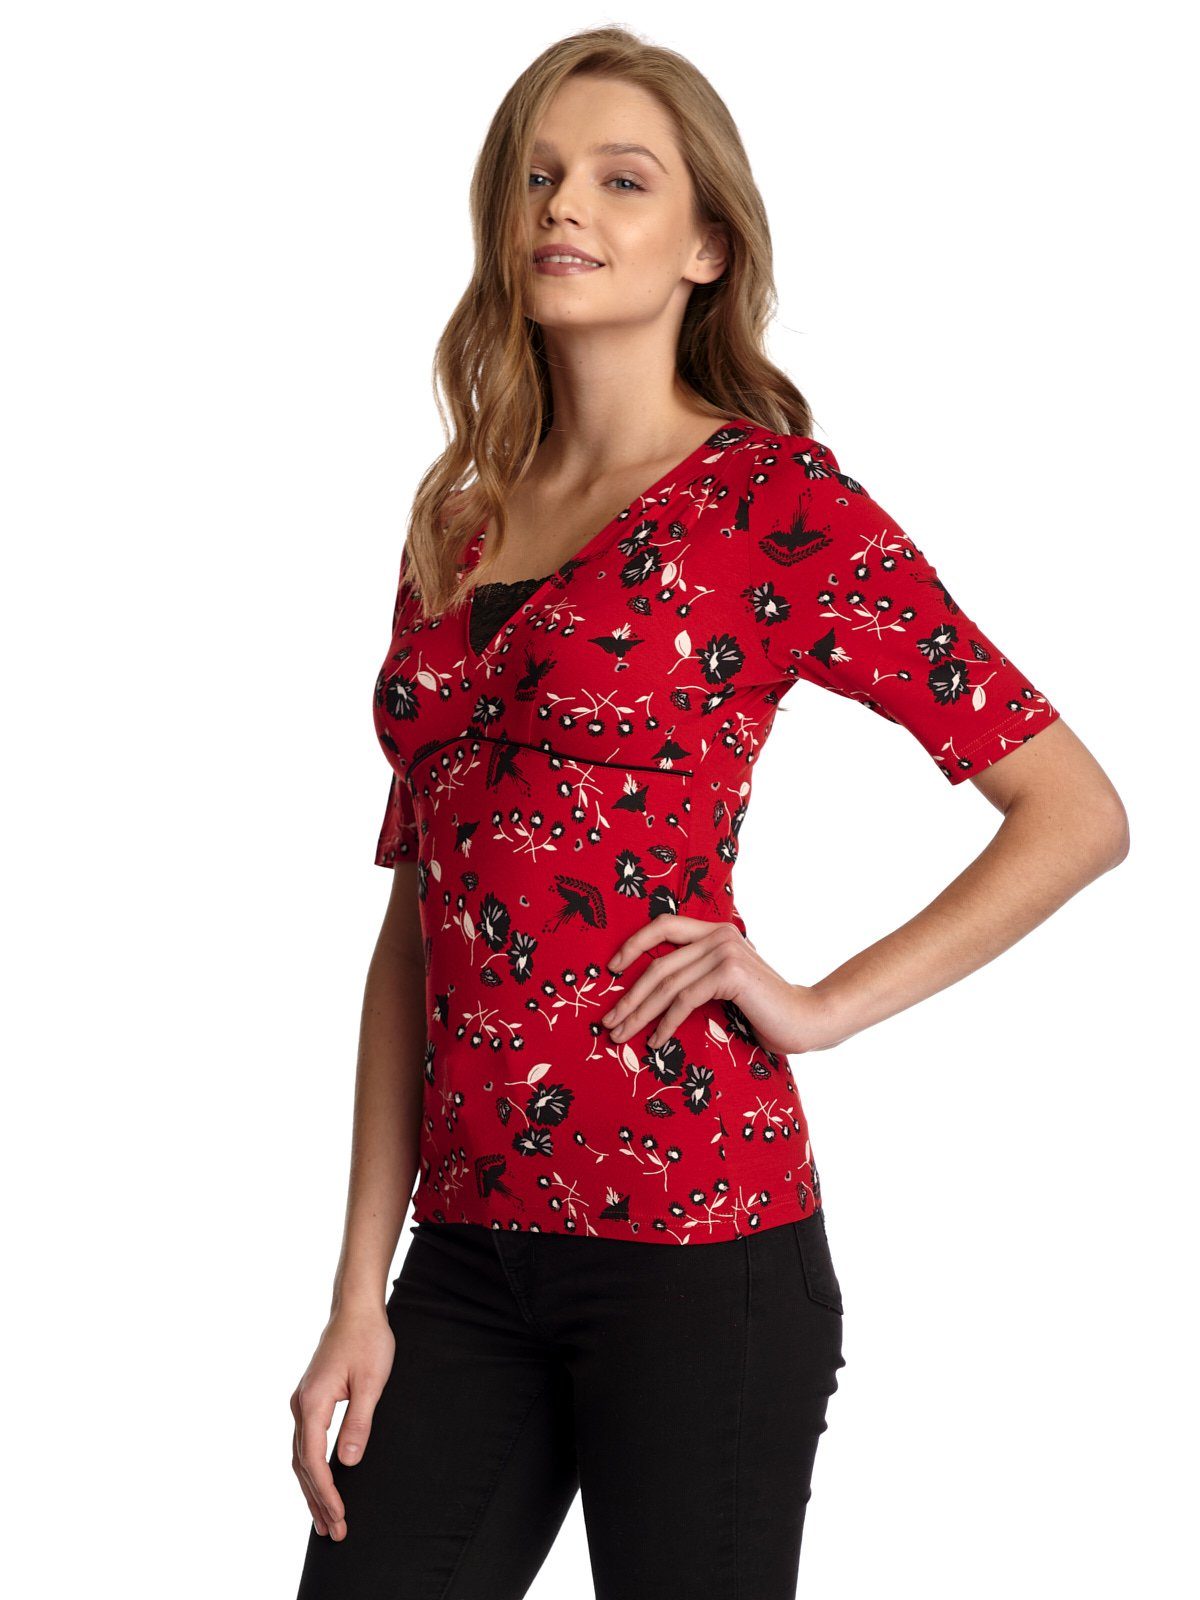 Vive T-Shirt Flower Red Maria